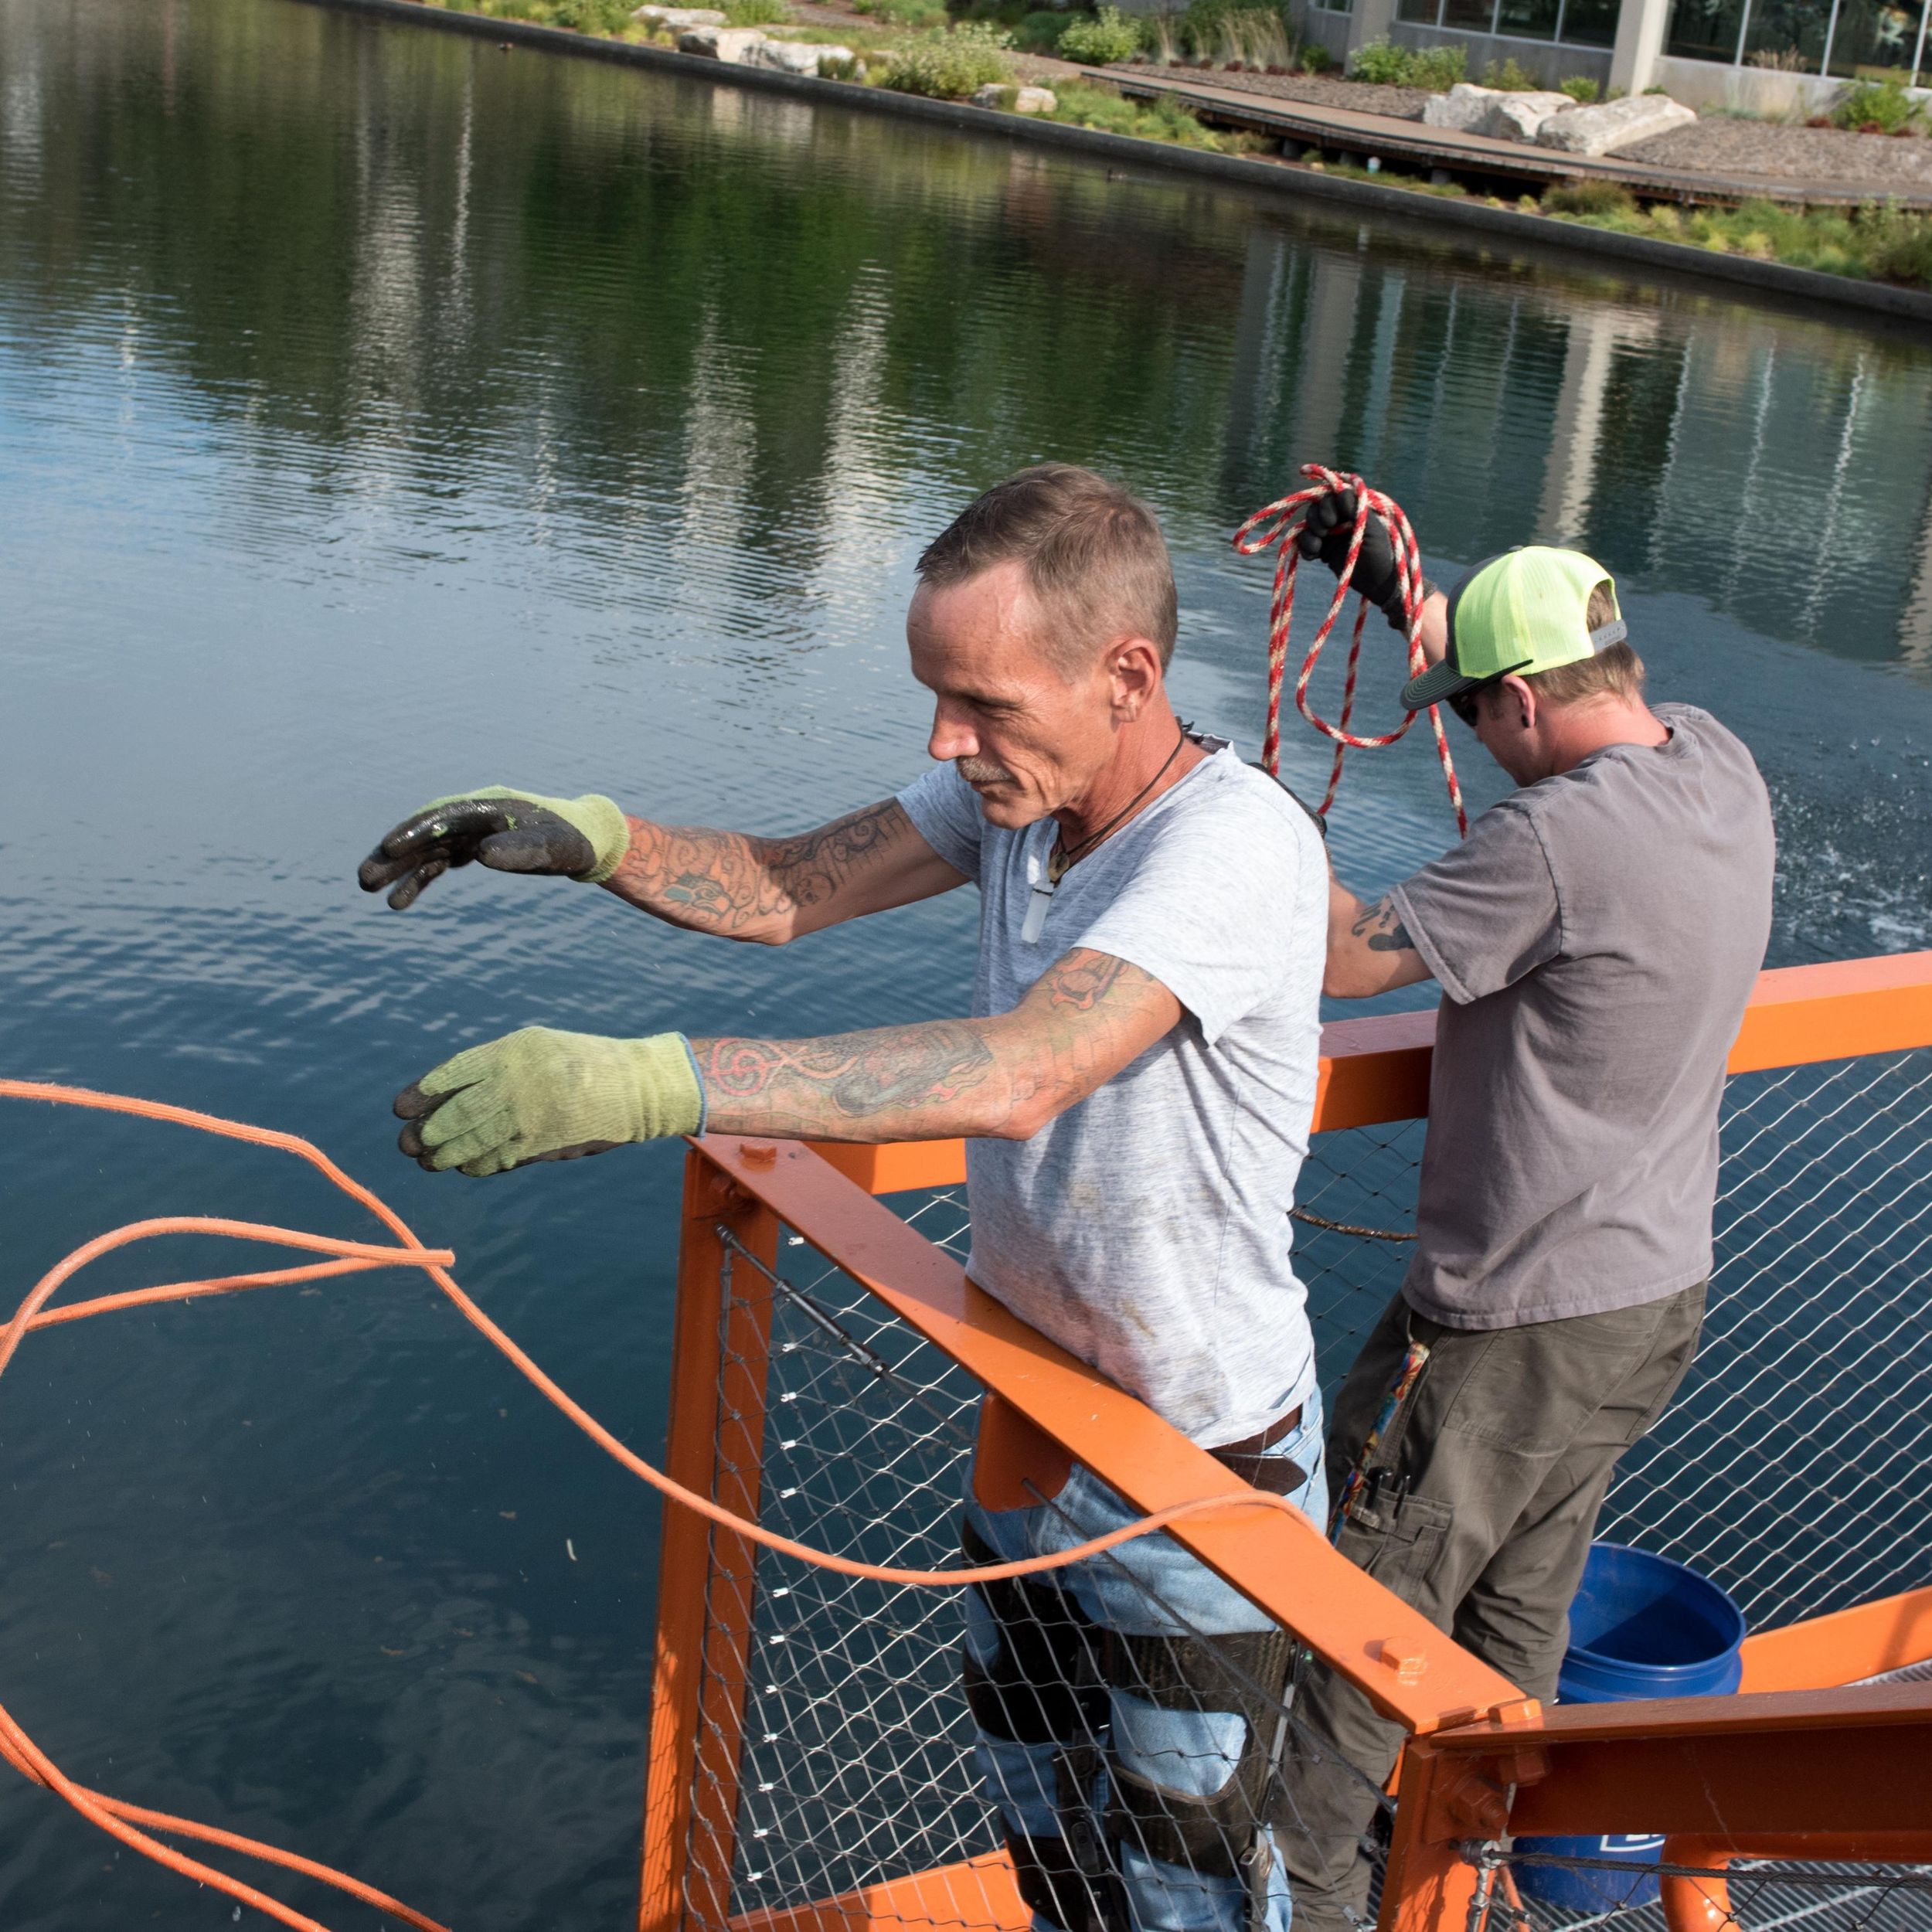 Popularity of magnet fishing grows in Spokane despite muddy legal, ethical  waters